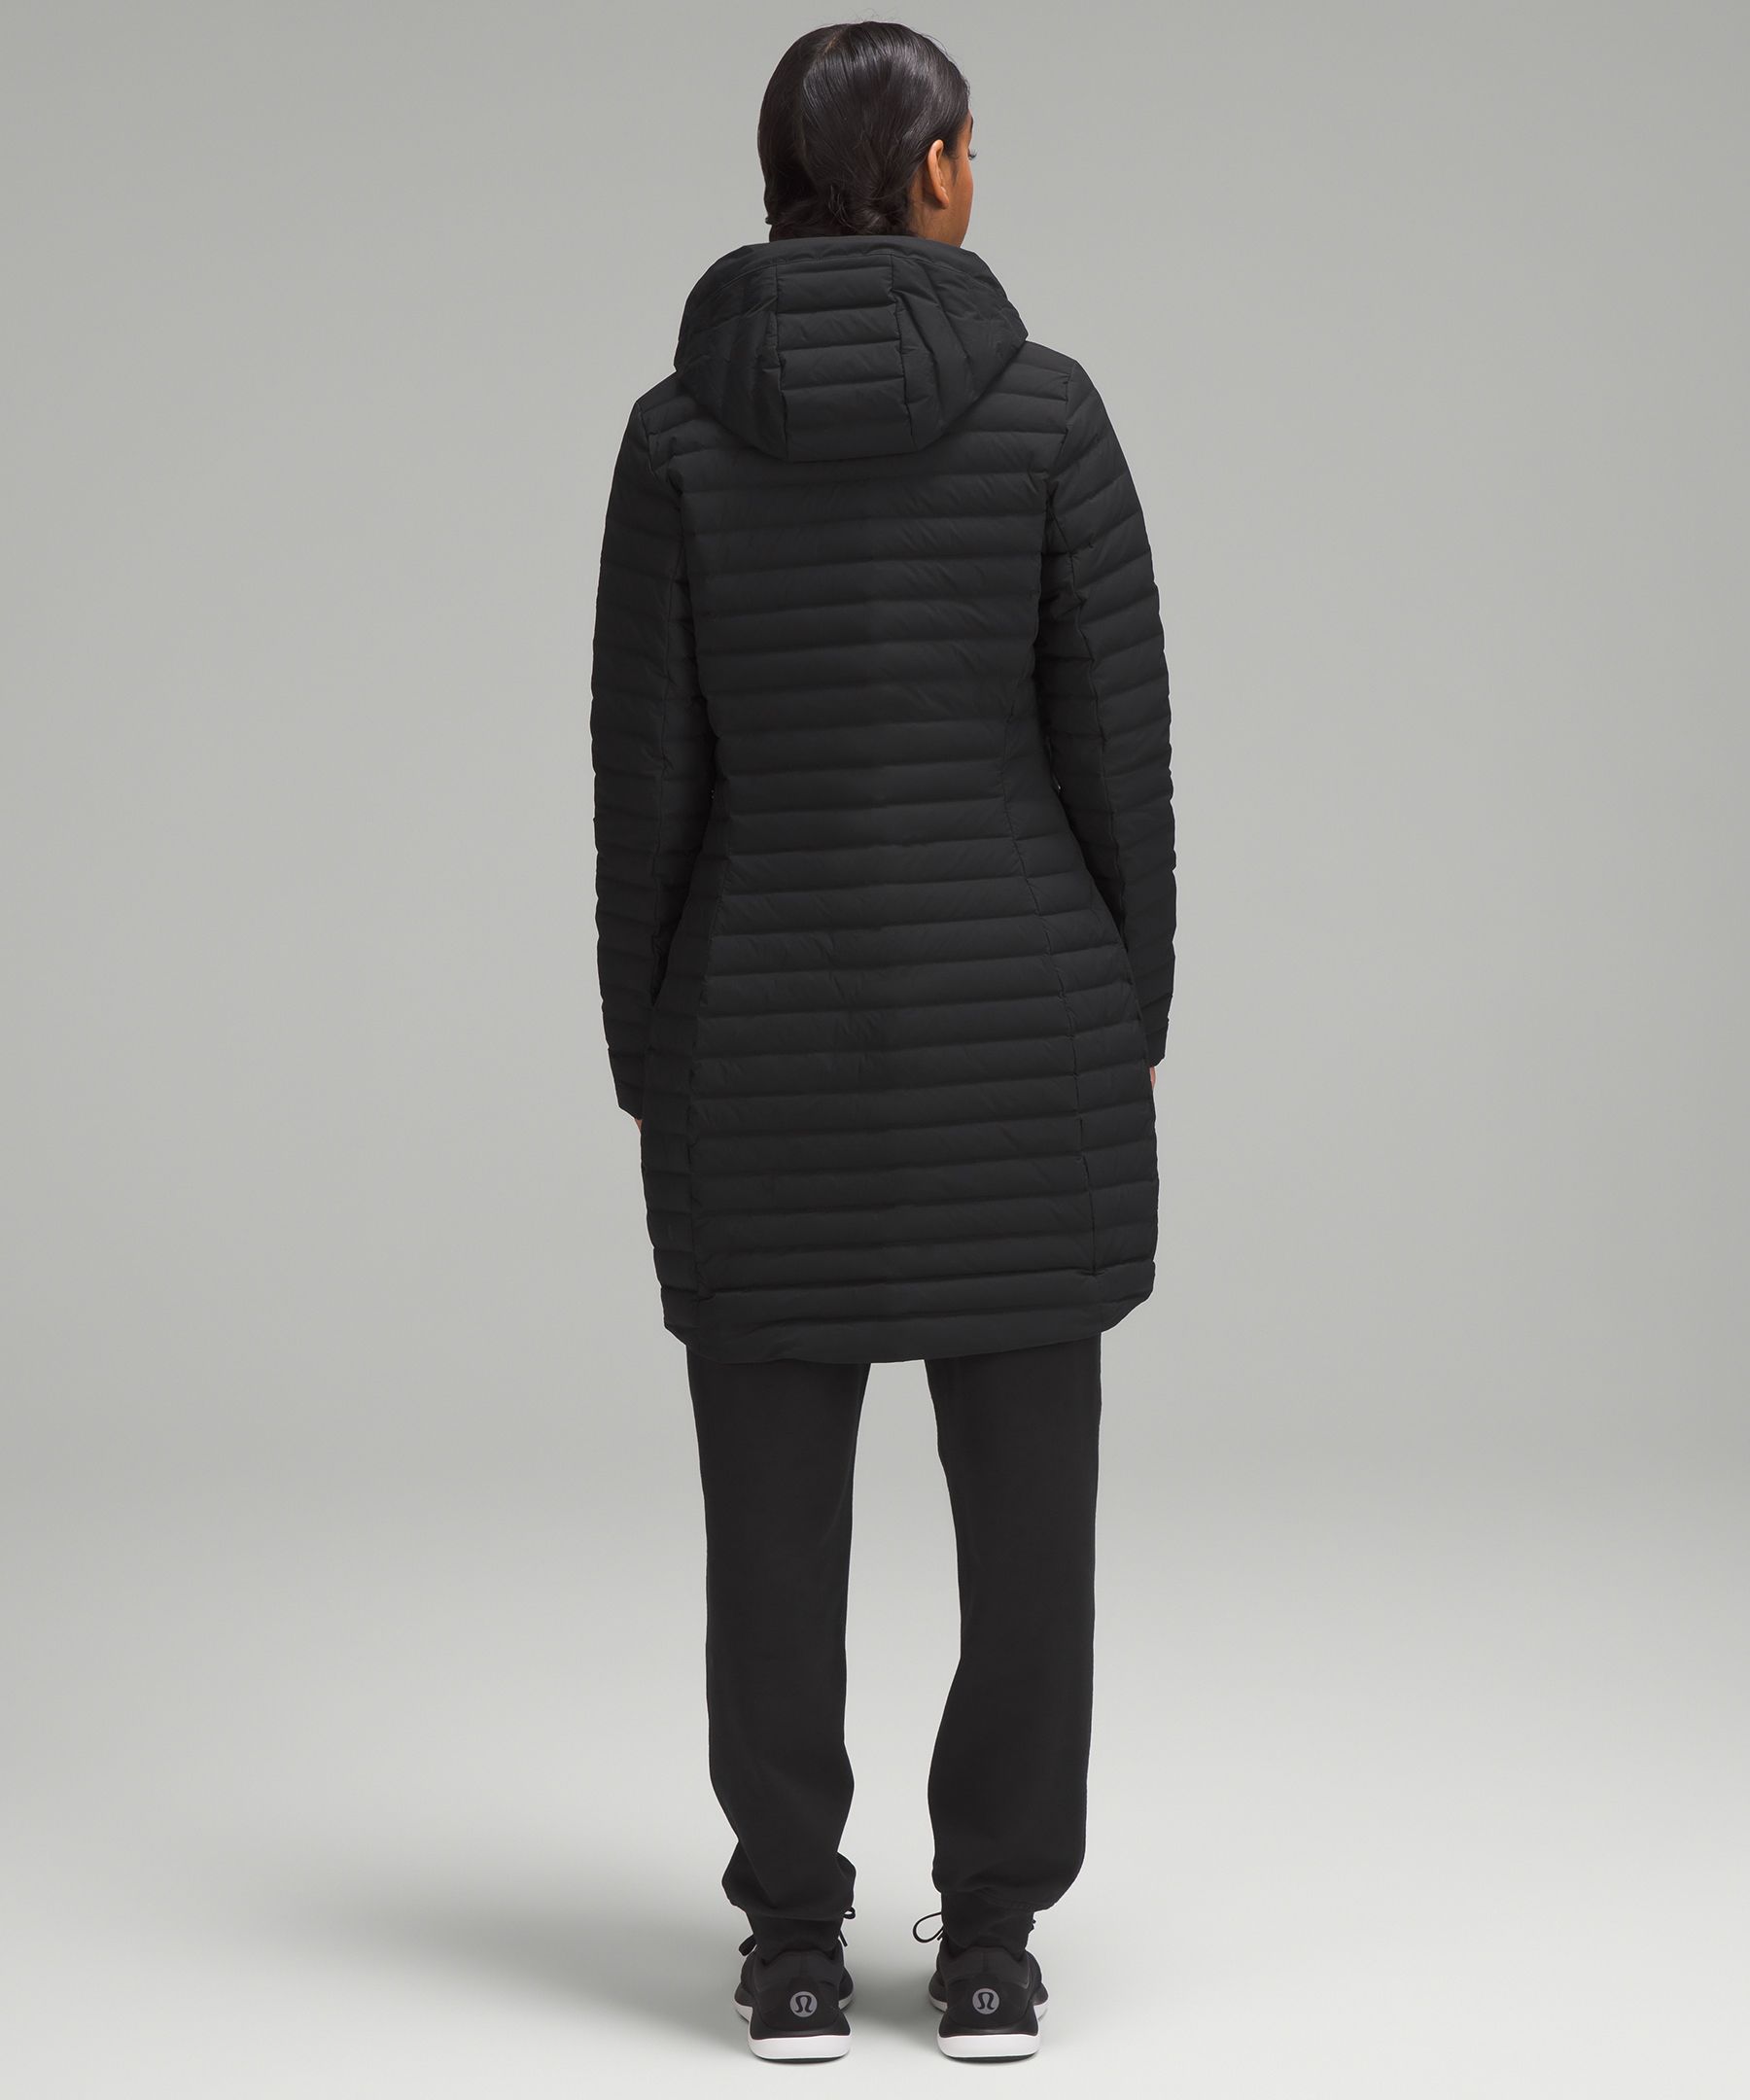 Lululemon Pack It Down Jacket Online Only - Retail $198